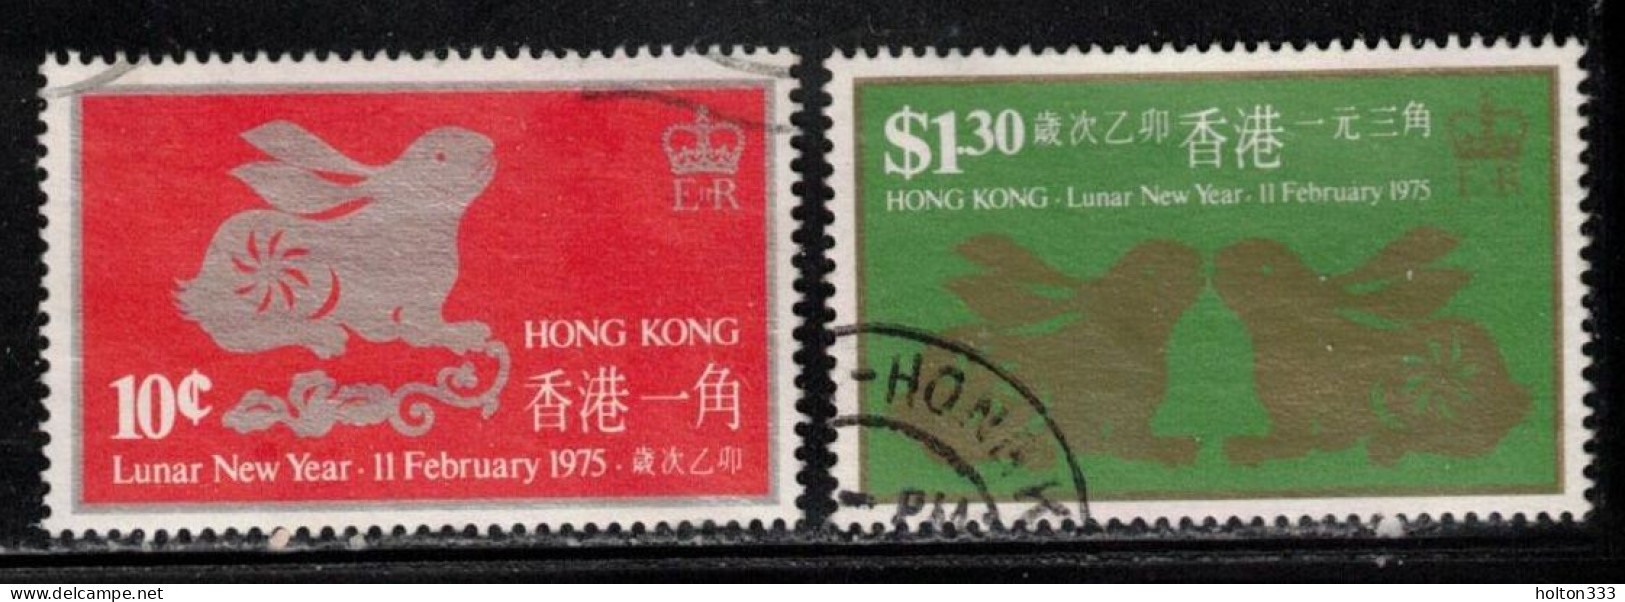 HONG KONG Scott # 302-3 Used - Lunar New Year 1975 - Used Stamps